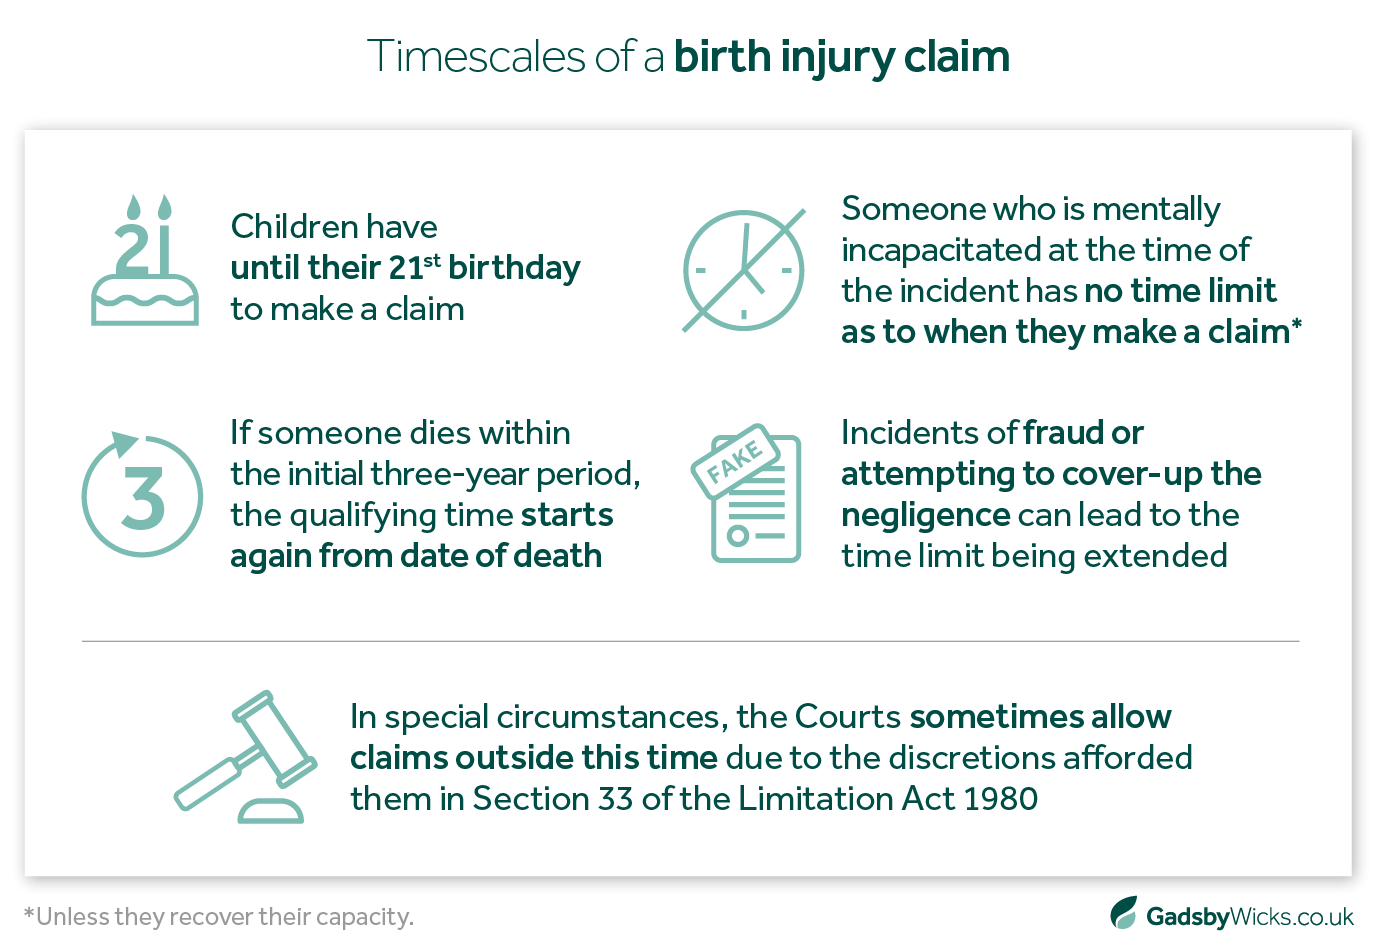 Timescales of birth injury claims statistics and infographic of how long you have to make a claim